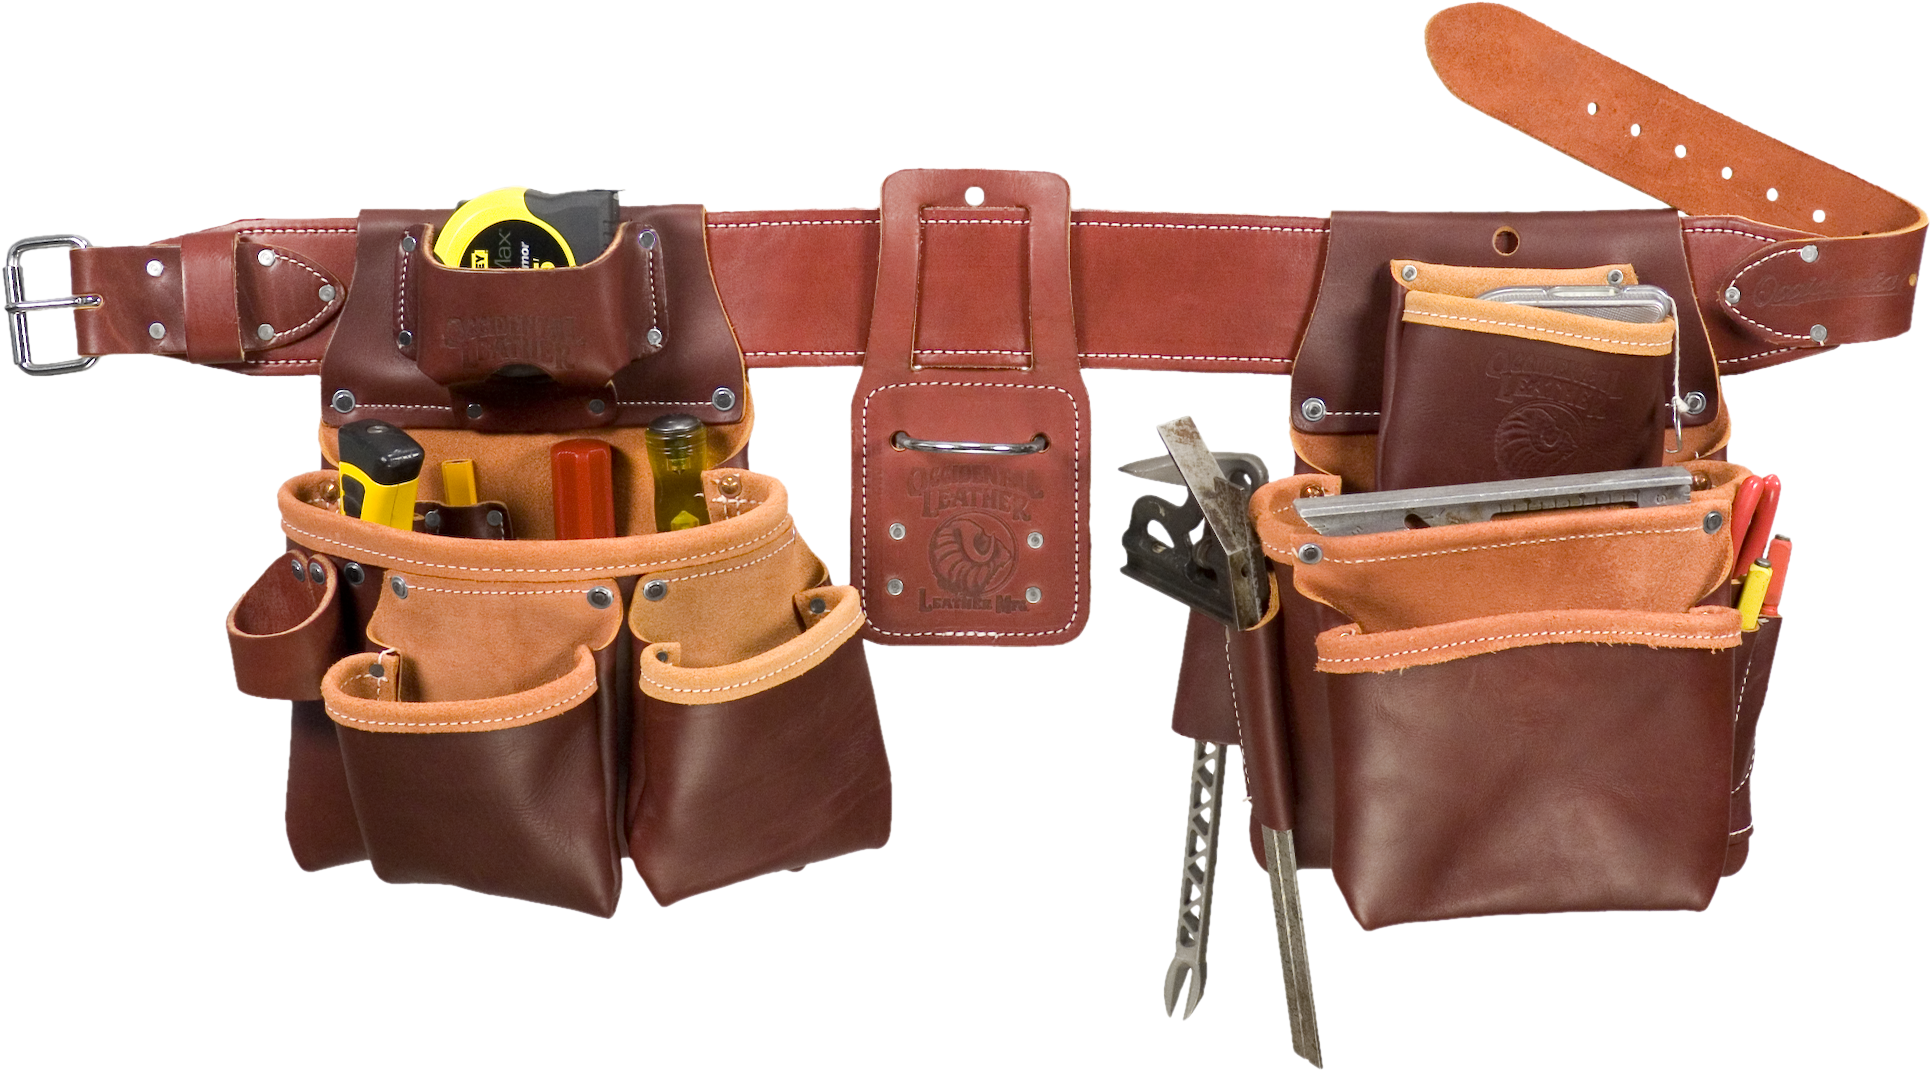 Occidental Leather 5080 XXL Pro Framer Tool Belt Package, XX-Large by Occidental Leather - 3